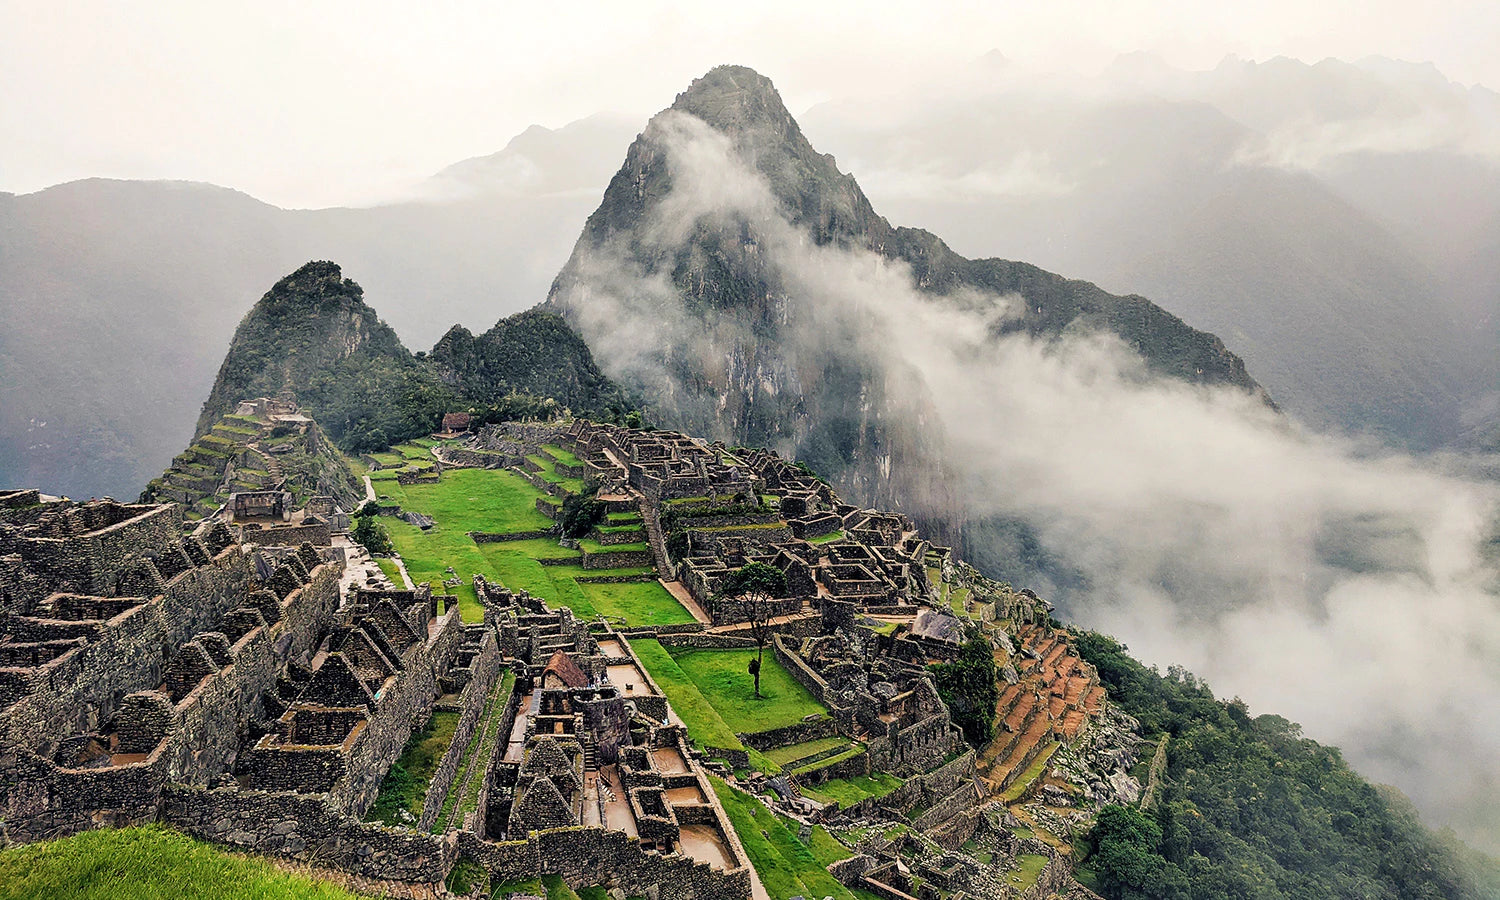 Machu Picchu – The Fabled Lost City of the Incas